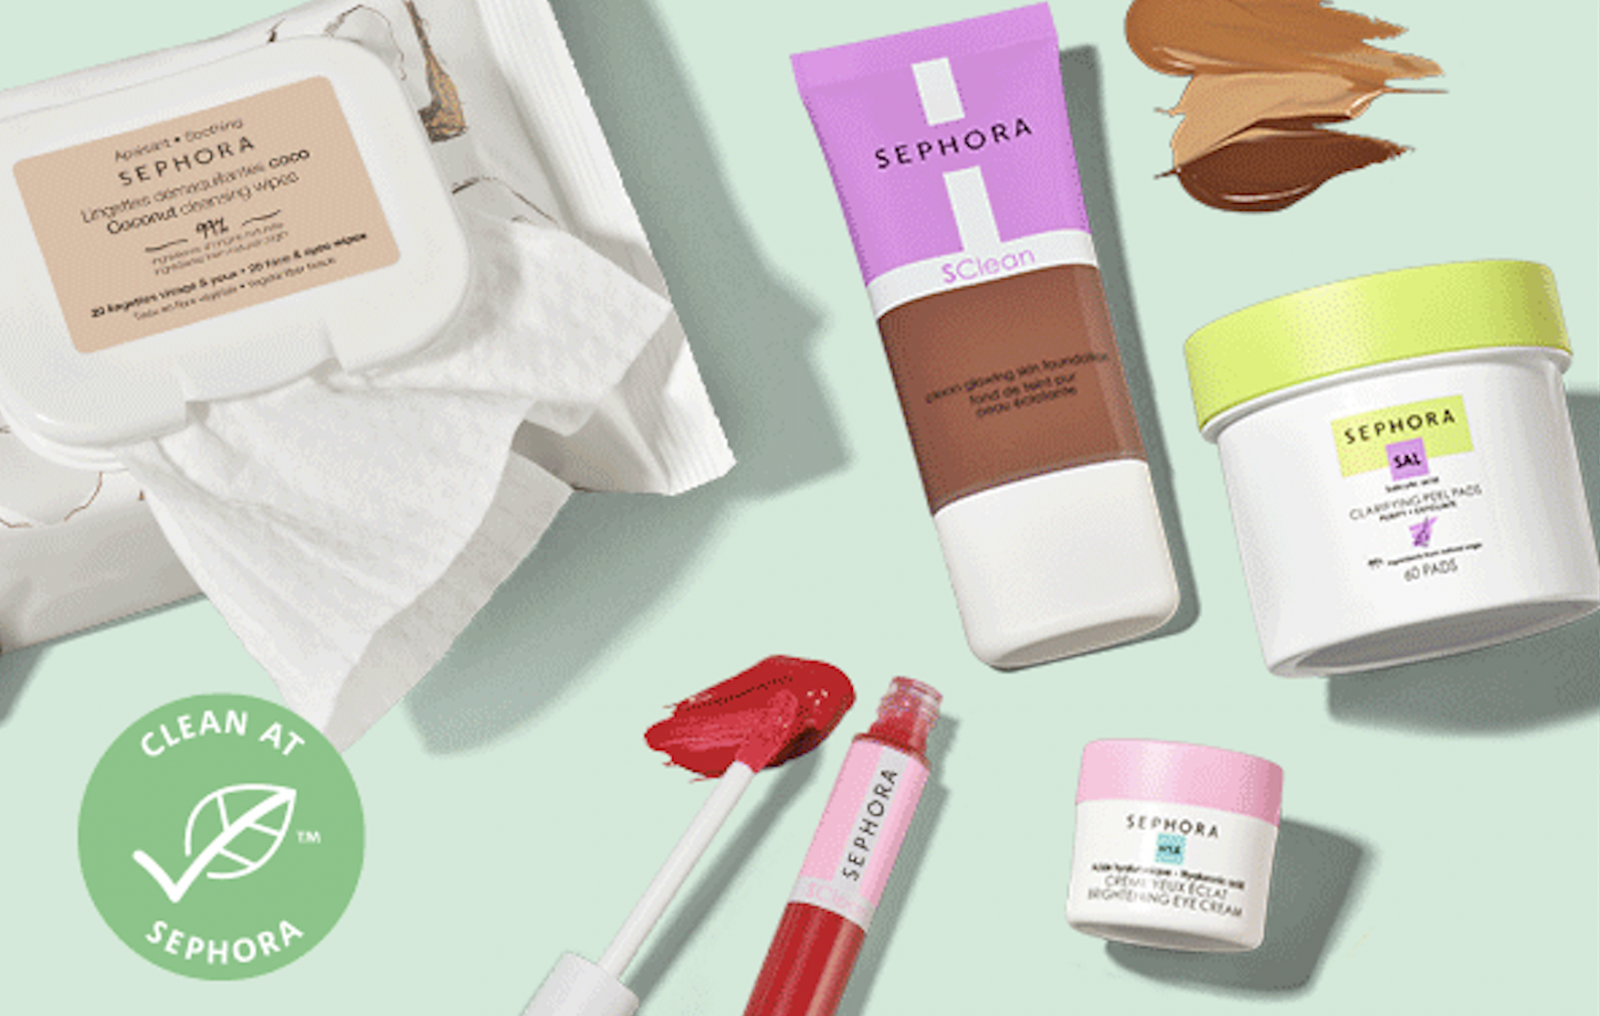 Sephora clean beauty products